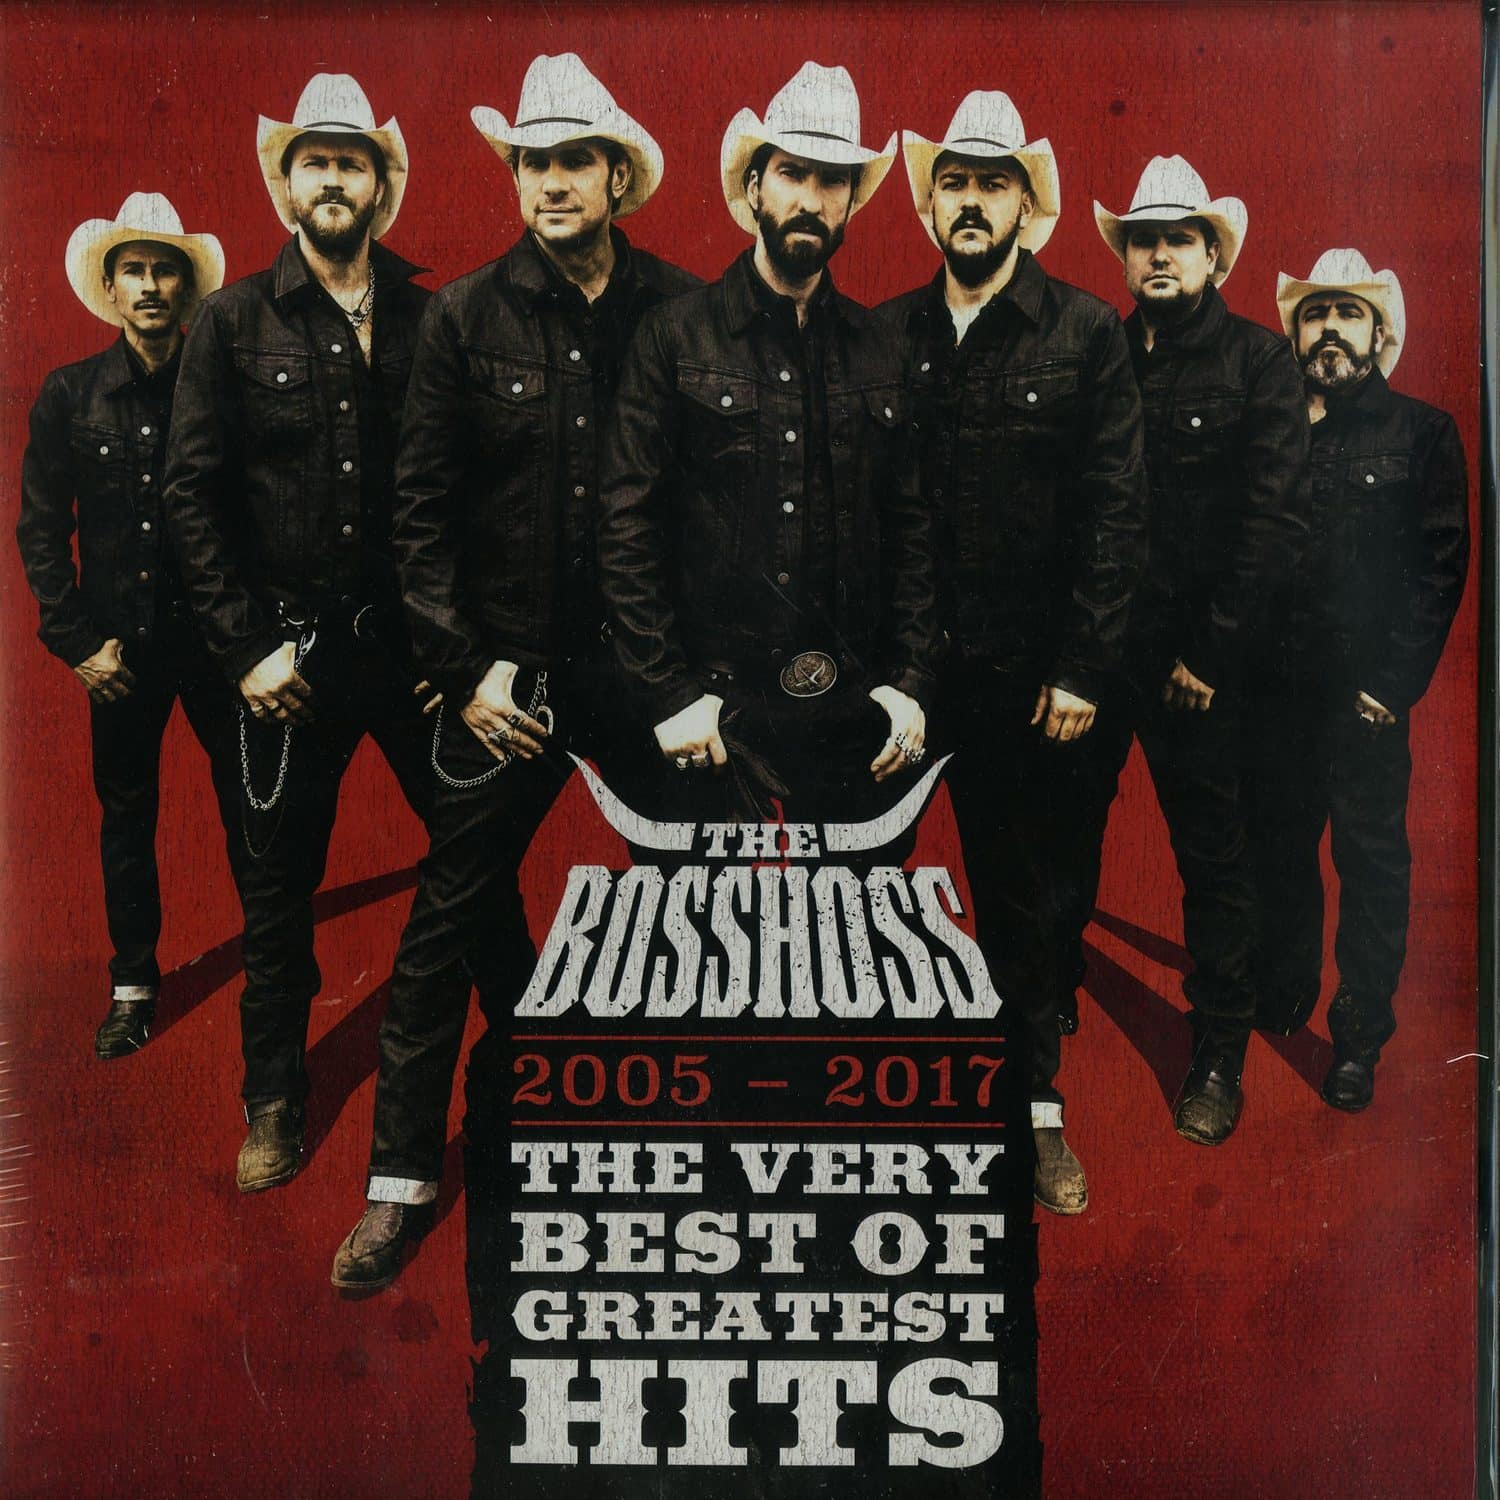 The BossHoss - THE VERY BEST OF GREATEST HITS 2005-2017 